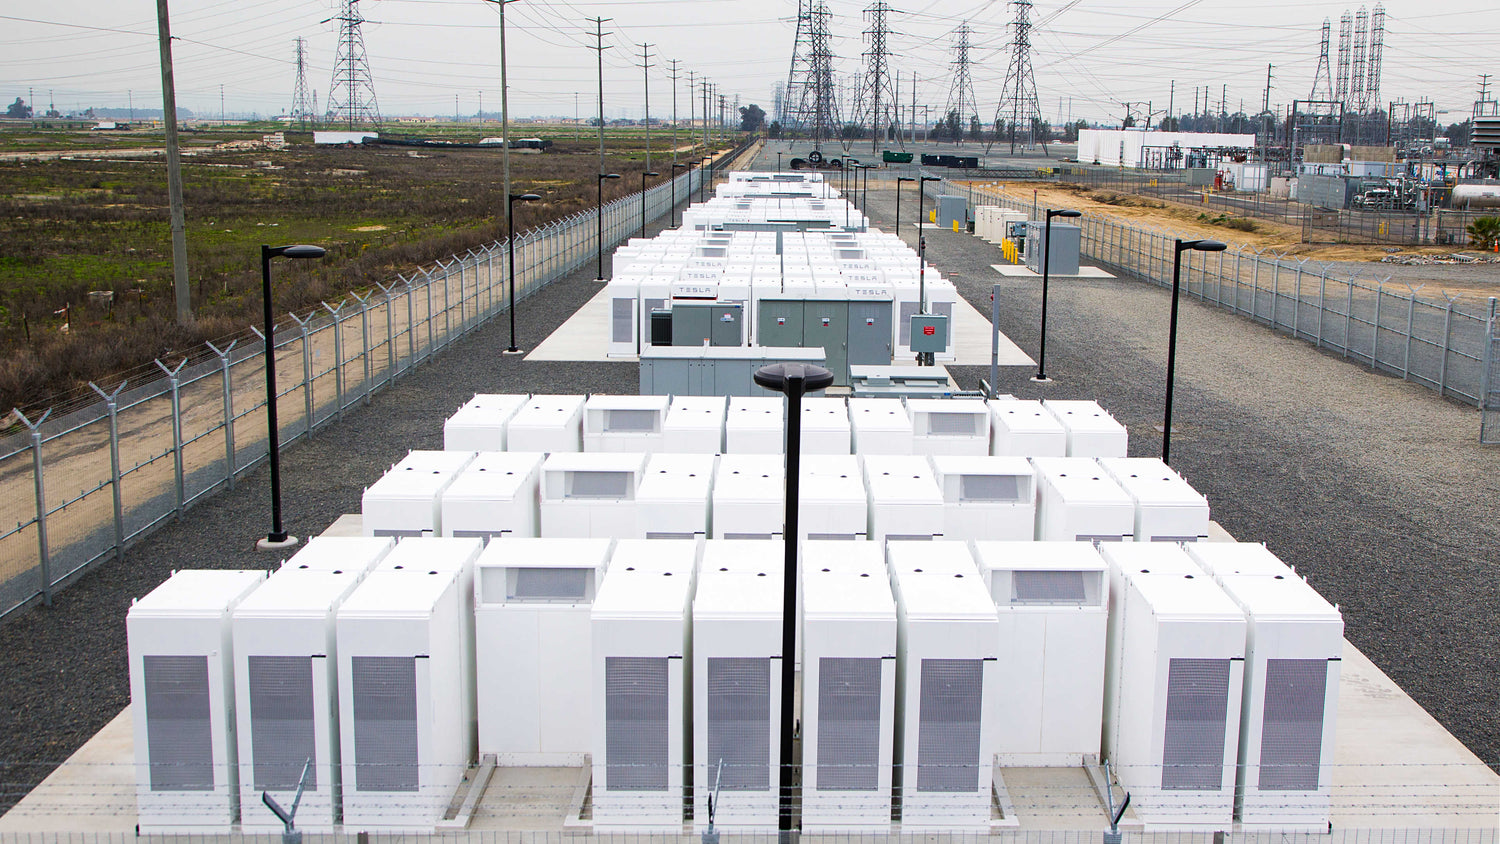 Tesla Huge Powerpack Battery Farm Extension Project in South Australia Is Completed